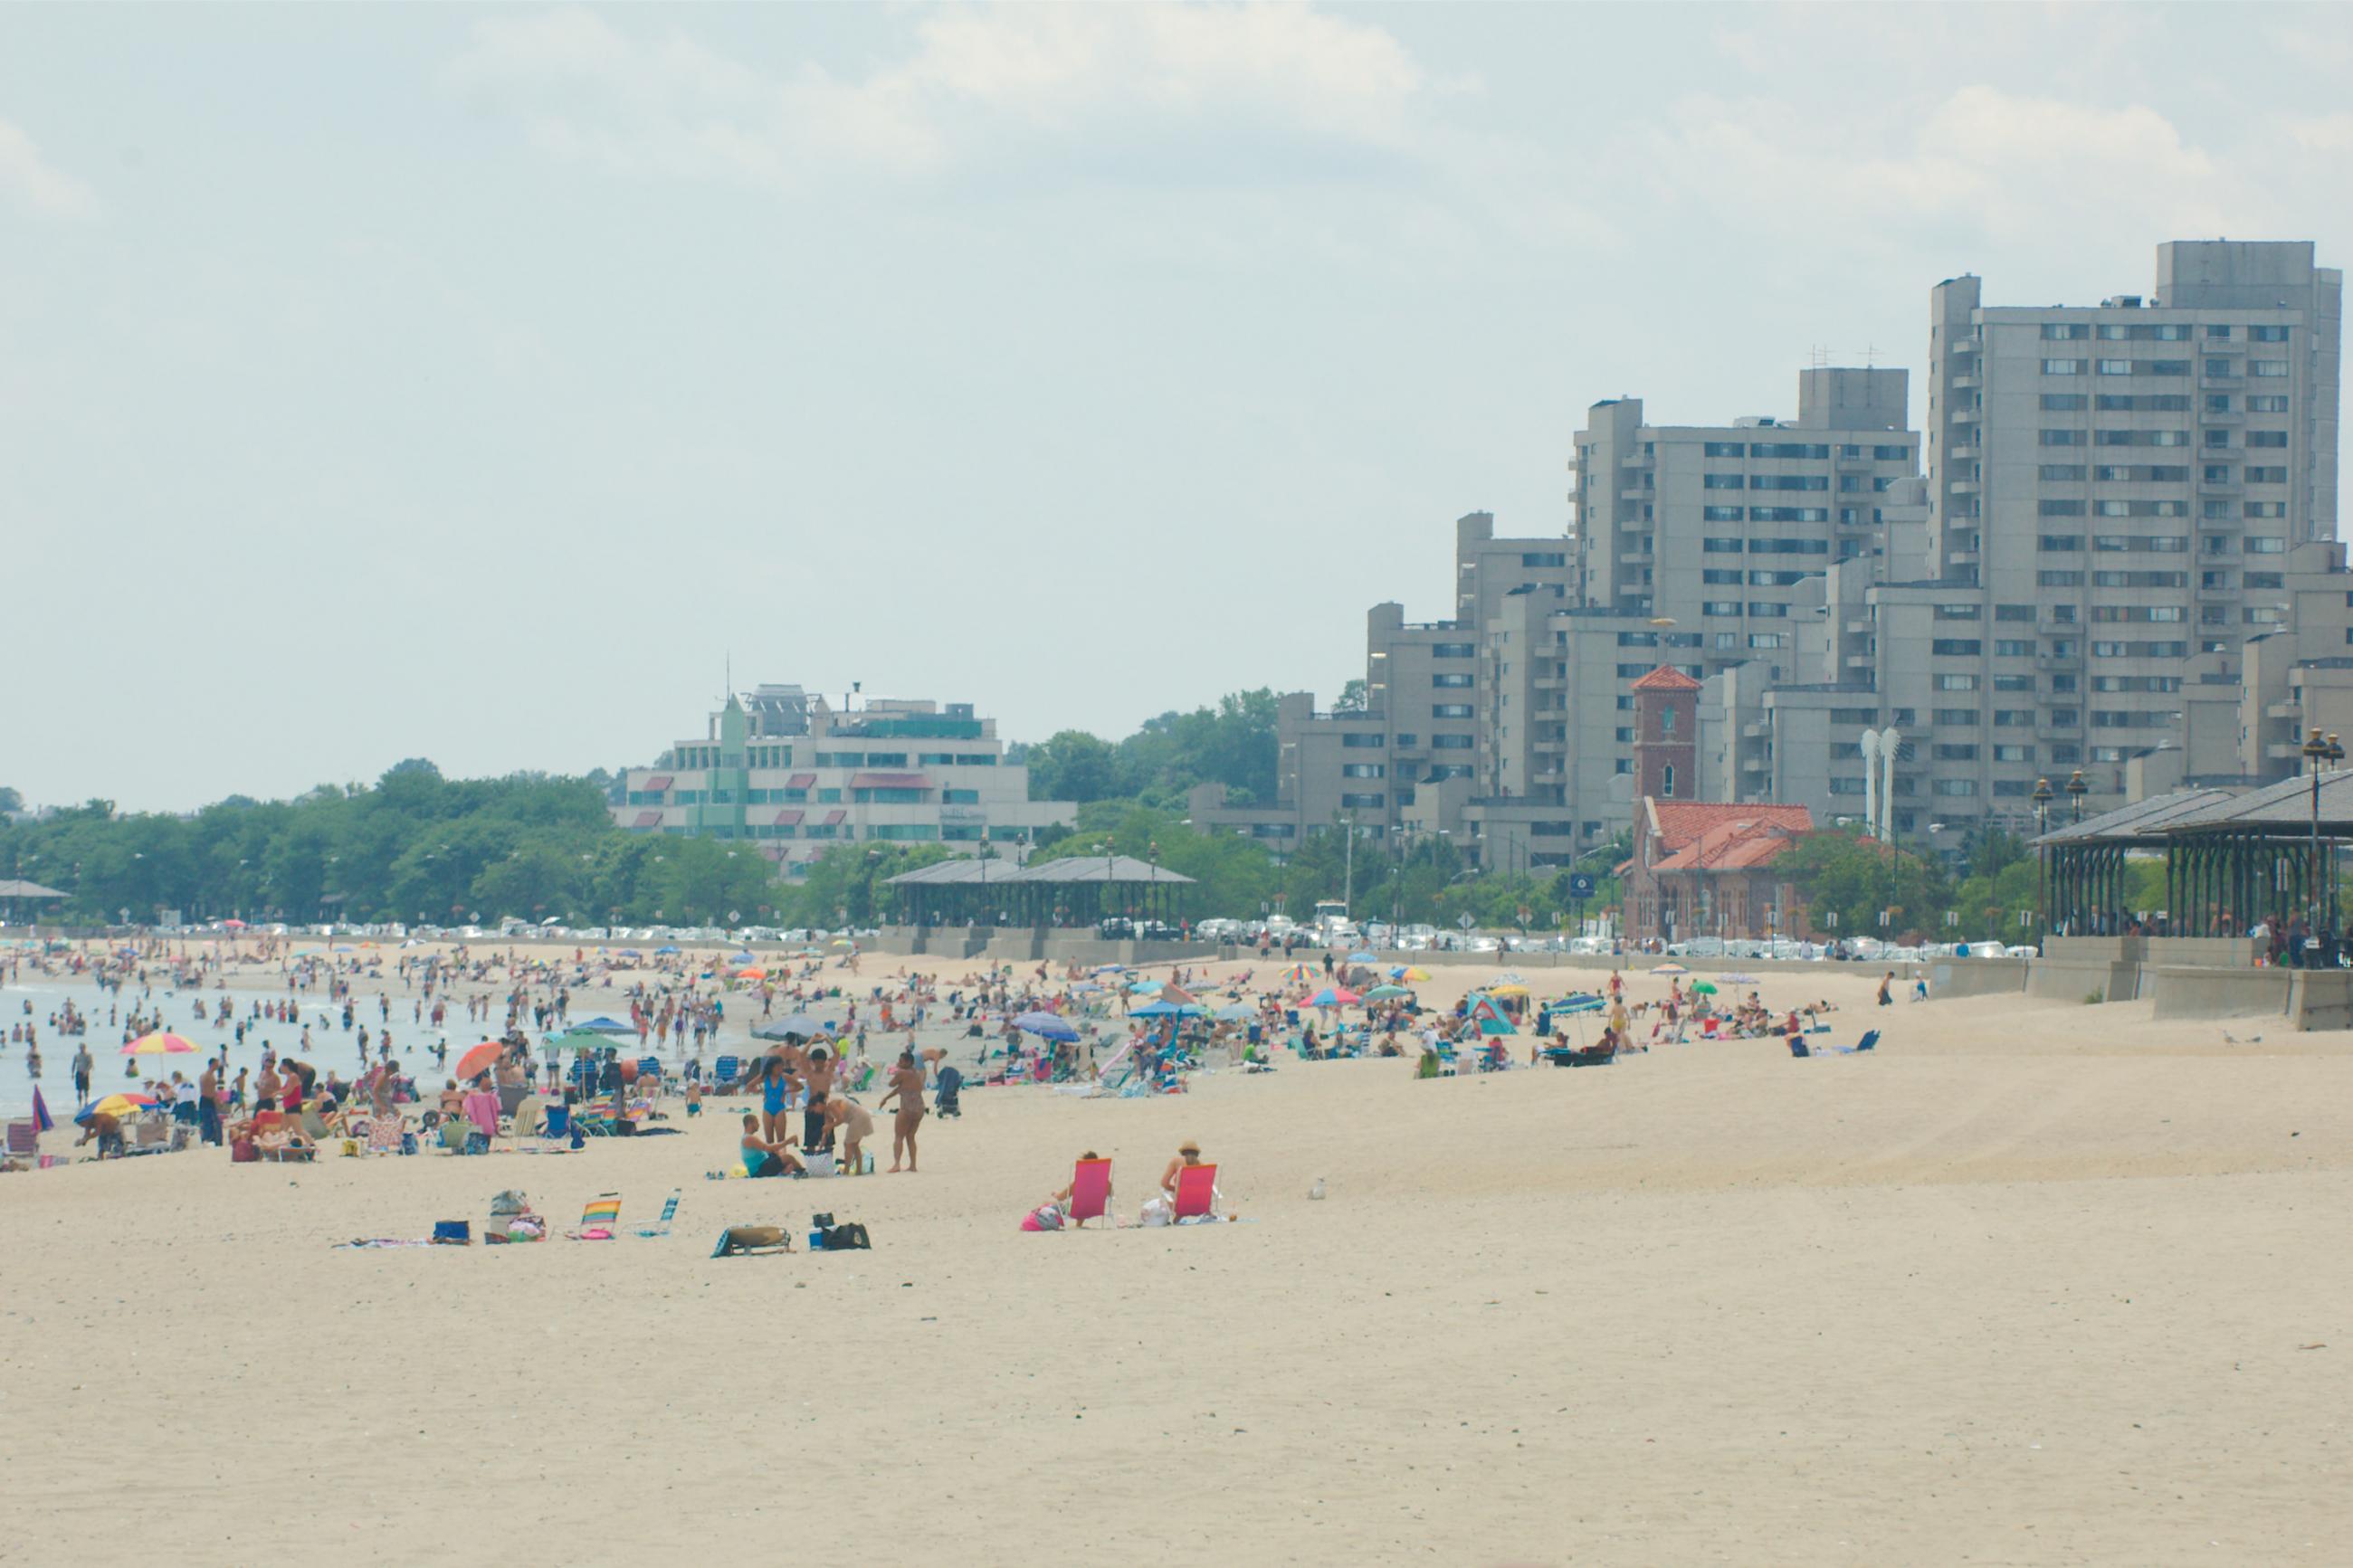 Revere Beach with many people. Photo by massmatt on Flickr (CC BY-SA 2.0).